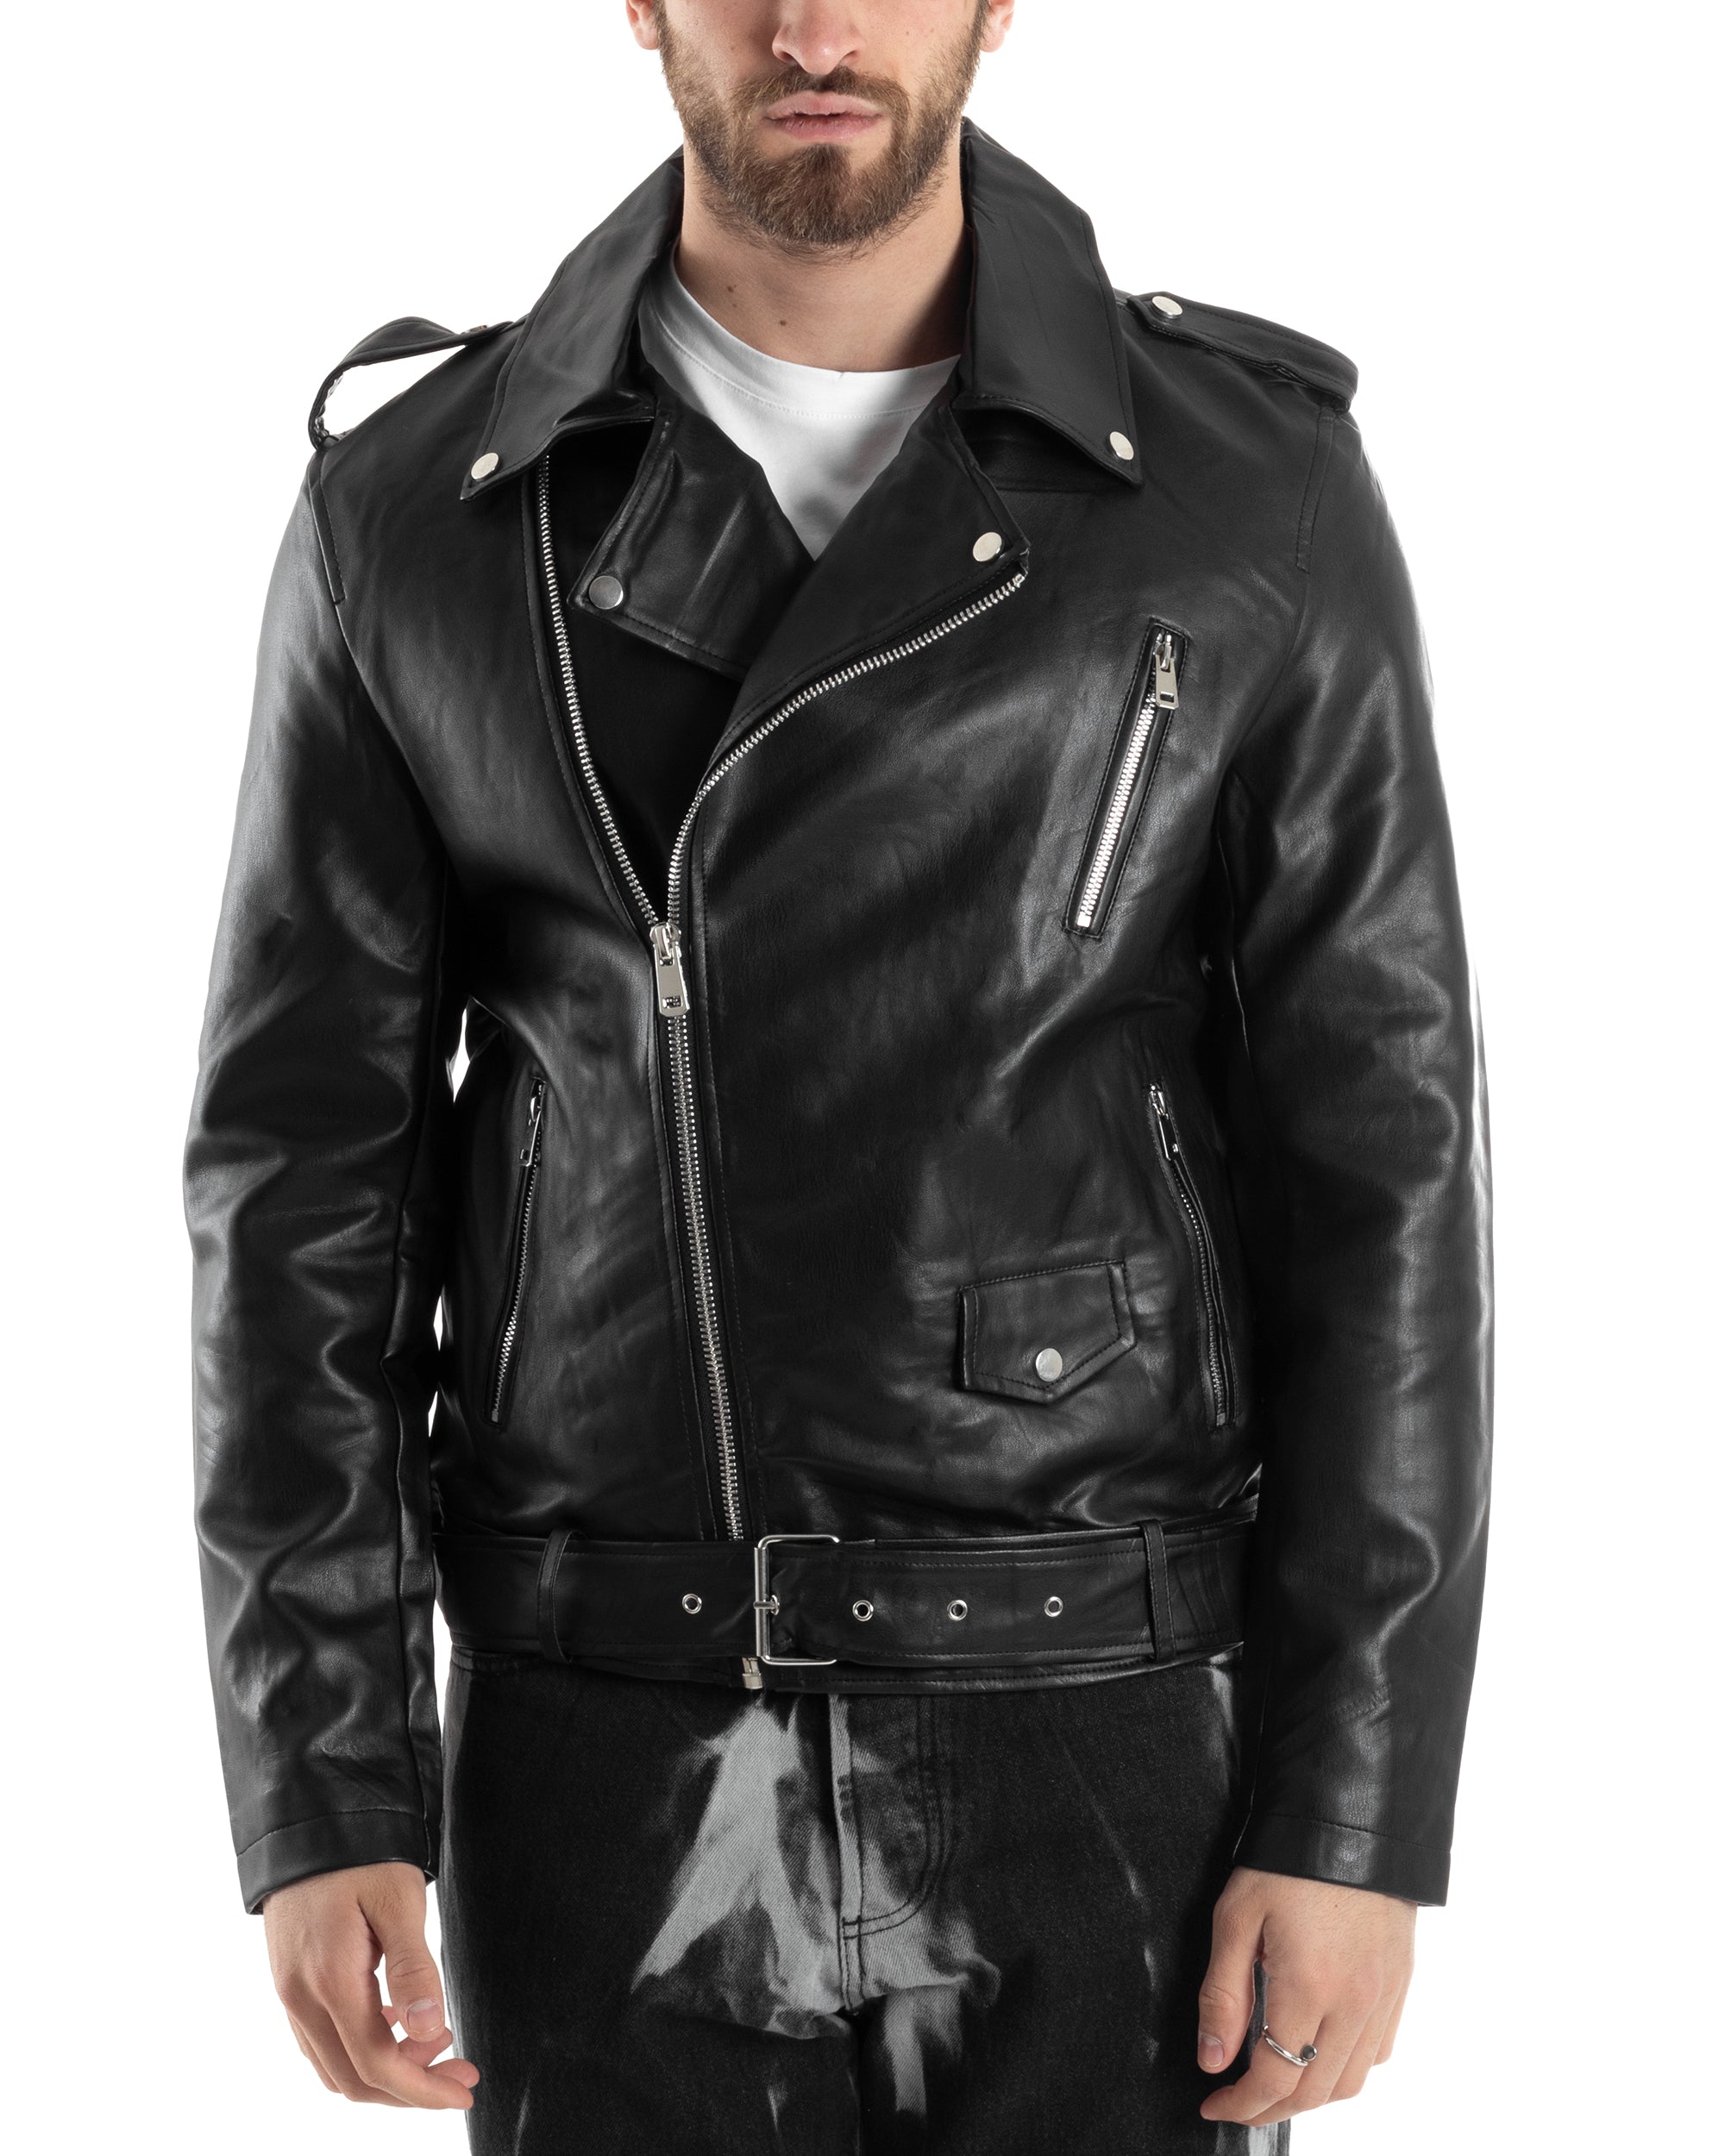 Men's Long Sleeve Solid Color Faux Leather Jacket Black Casual Studded GIOSAL G2873A